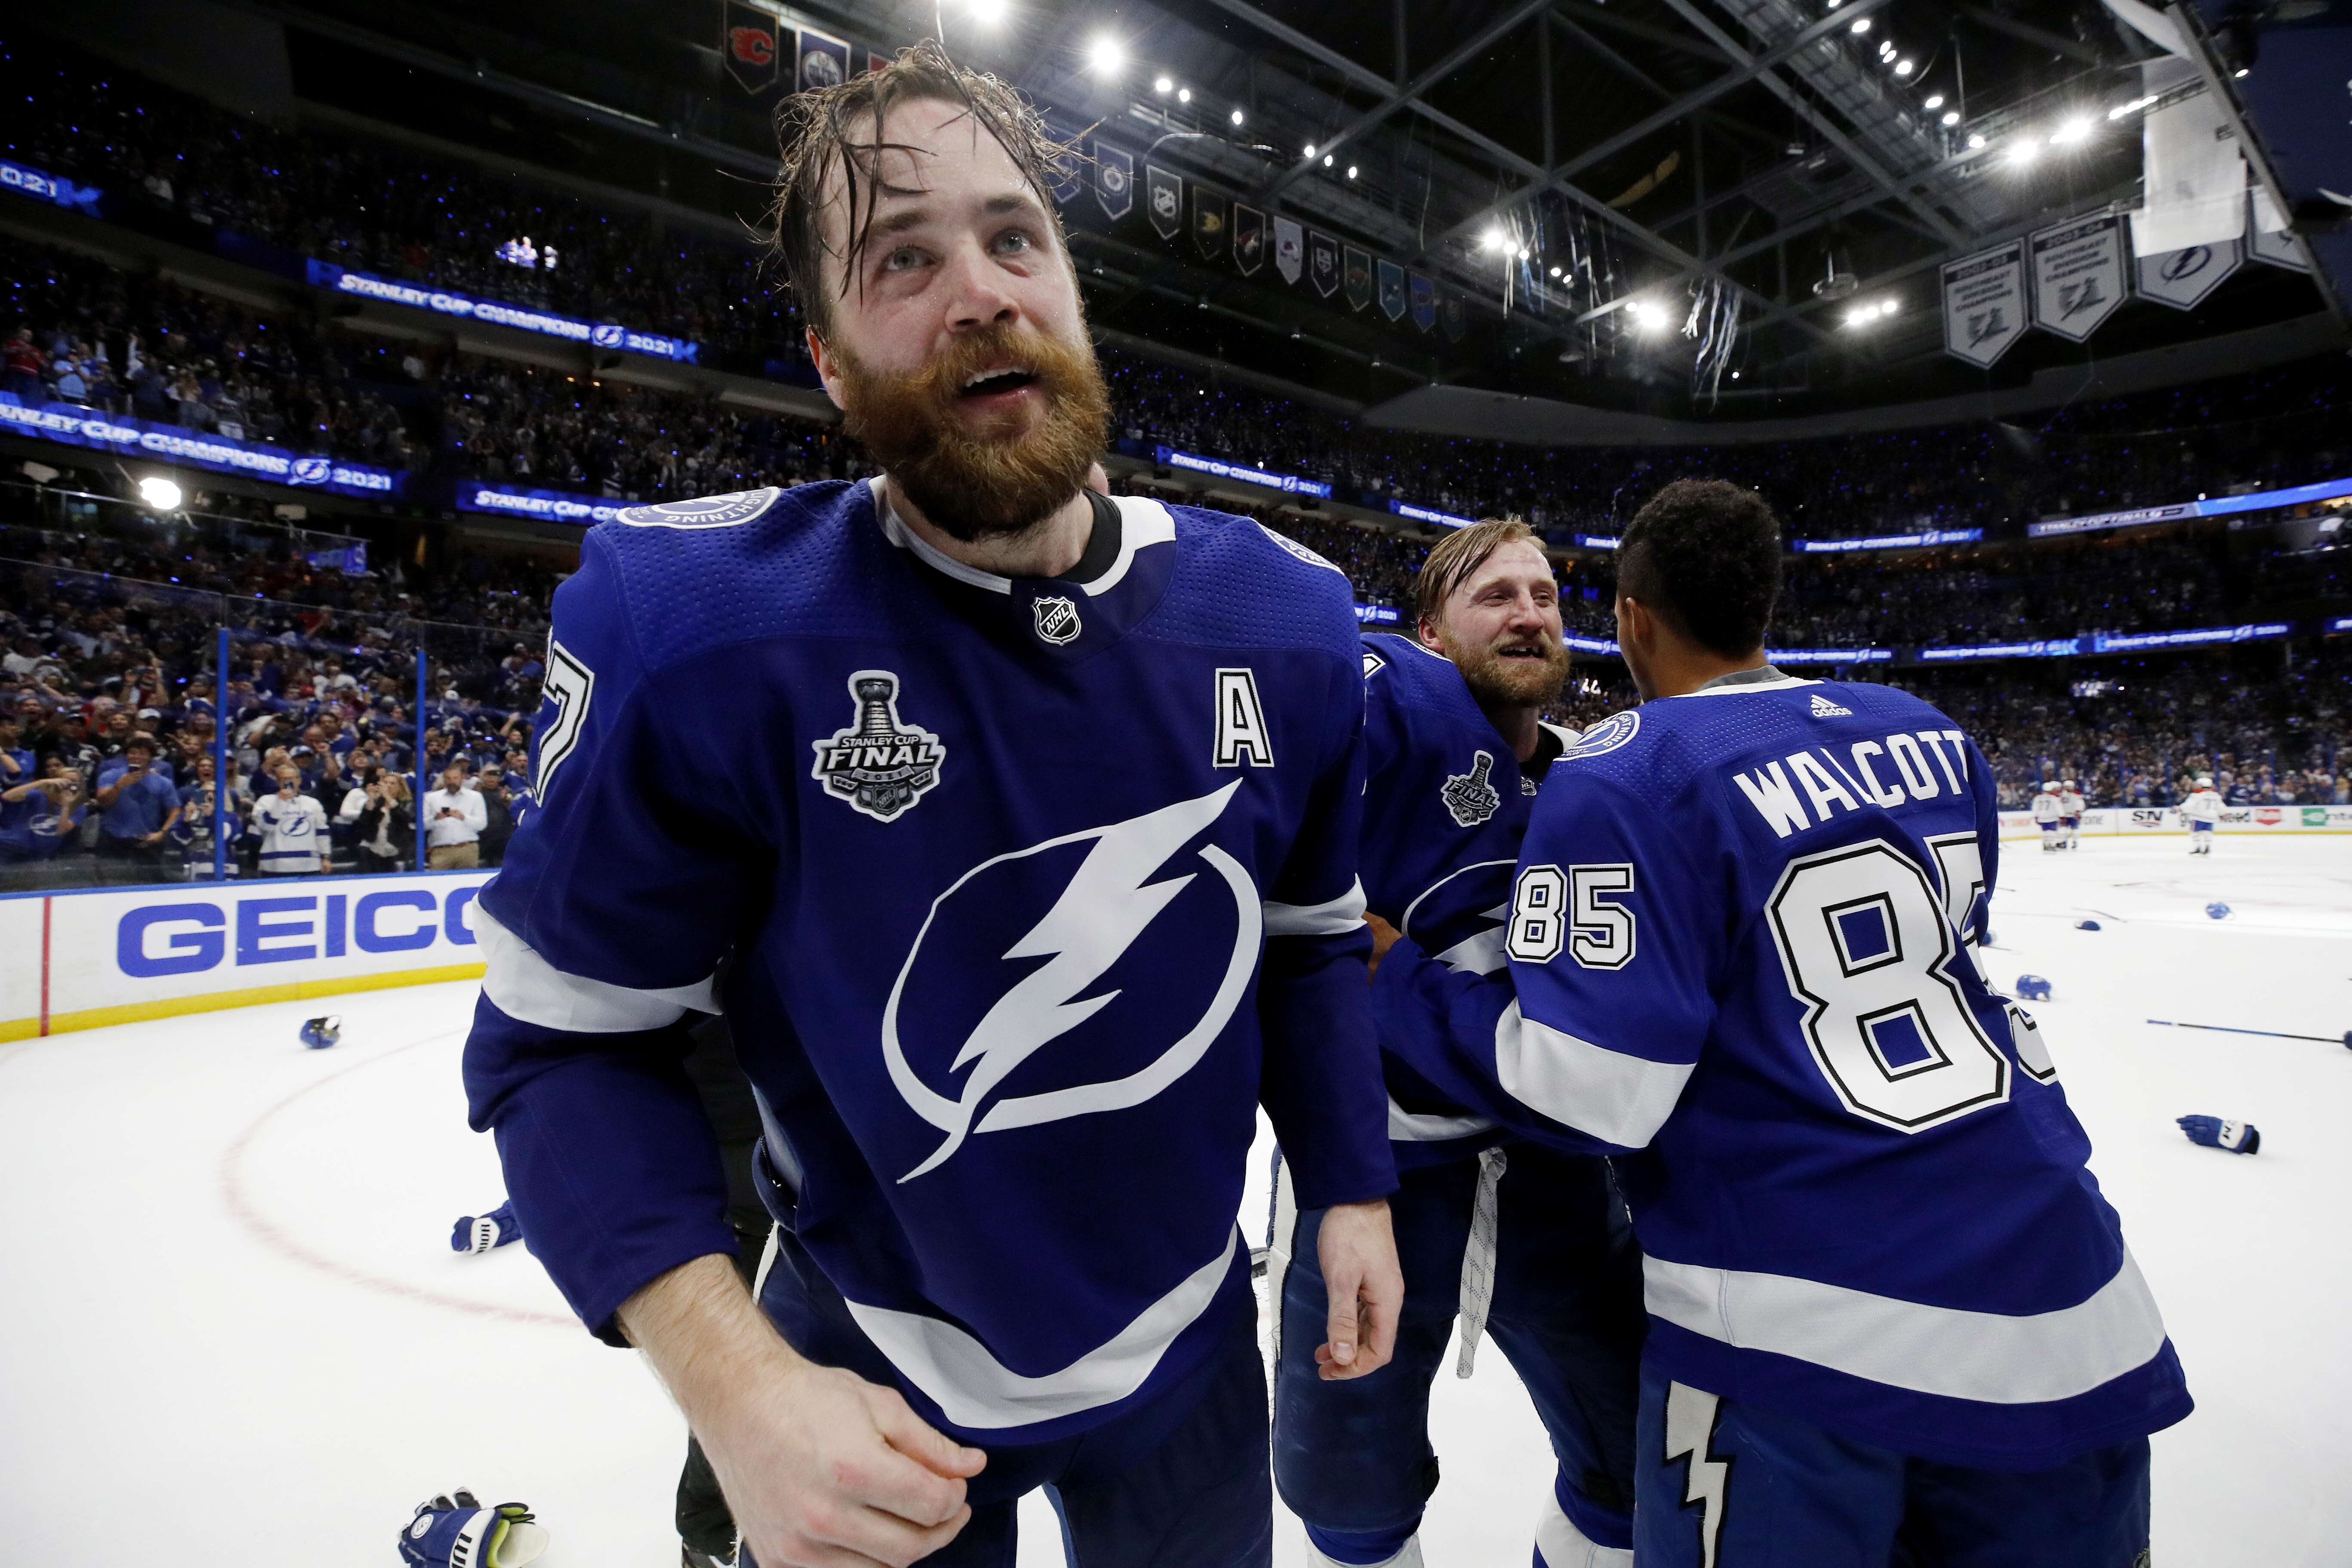 Victor Hedman and the Tampa Bay Lightning have repeated as NHL champions, winning the Stanley Cup at their home arena in Florida. Photo: AFP